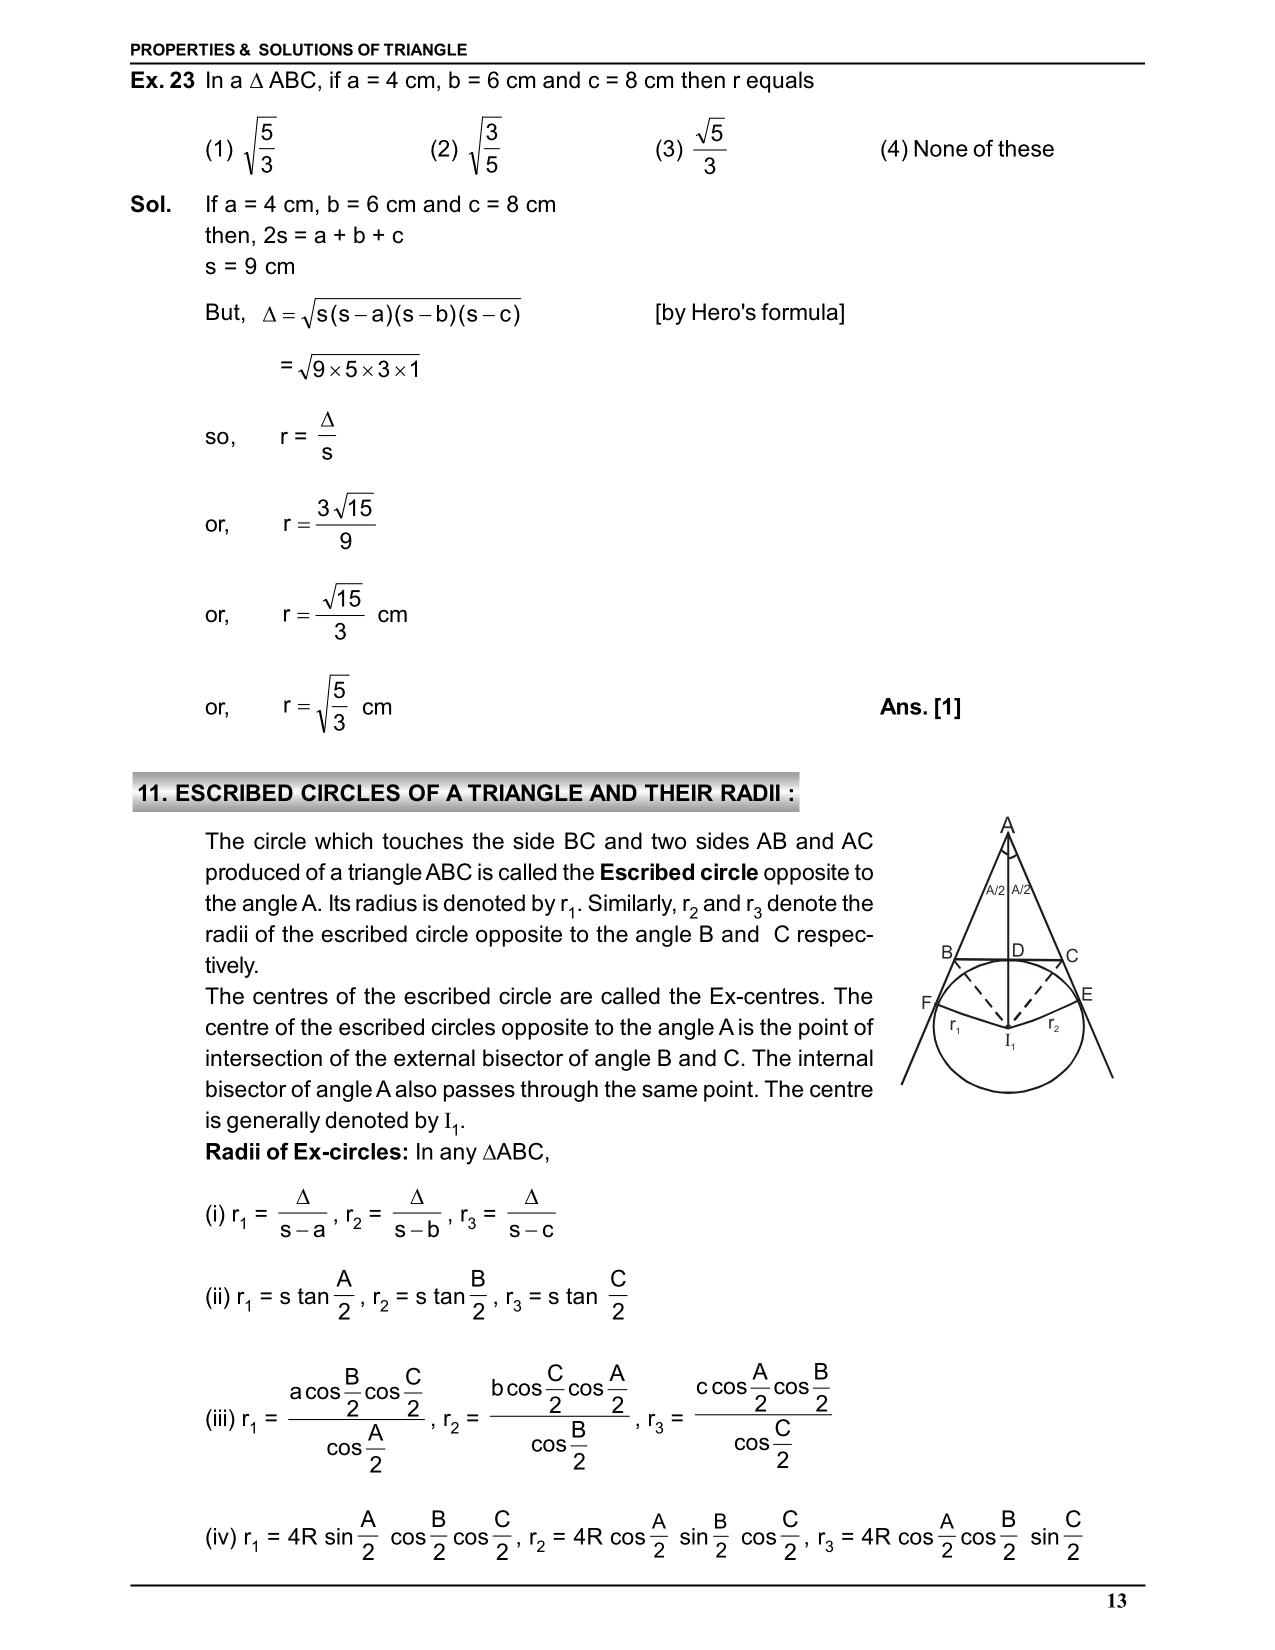 Properties and Solution of Triangle